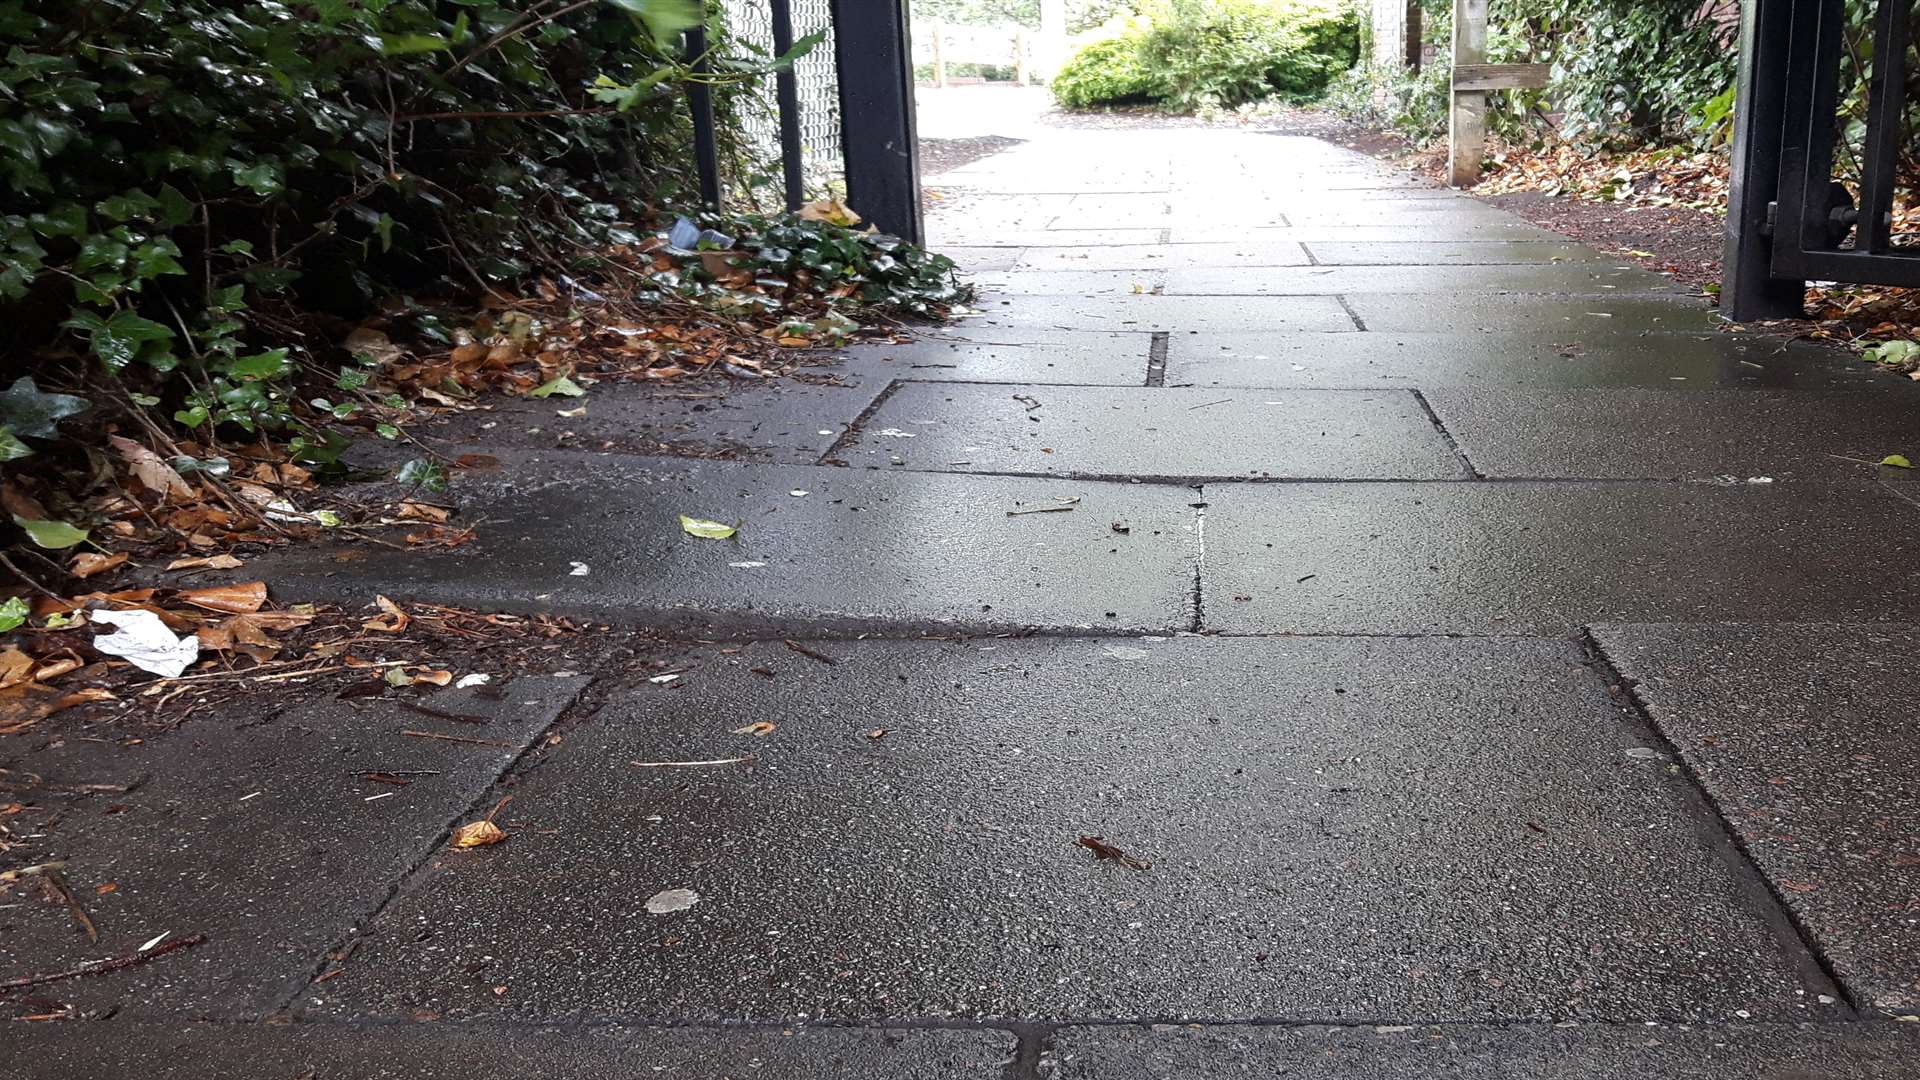 The raised paving slap on the path that connects Queen Street to Park Street in Deal